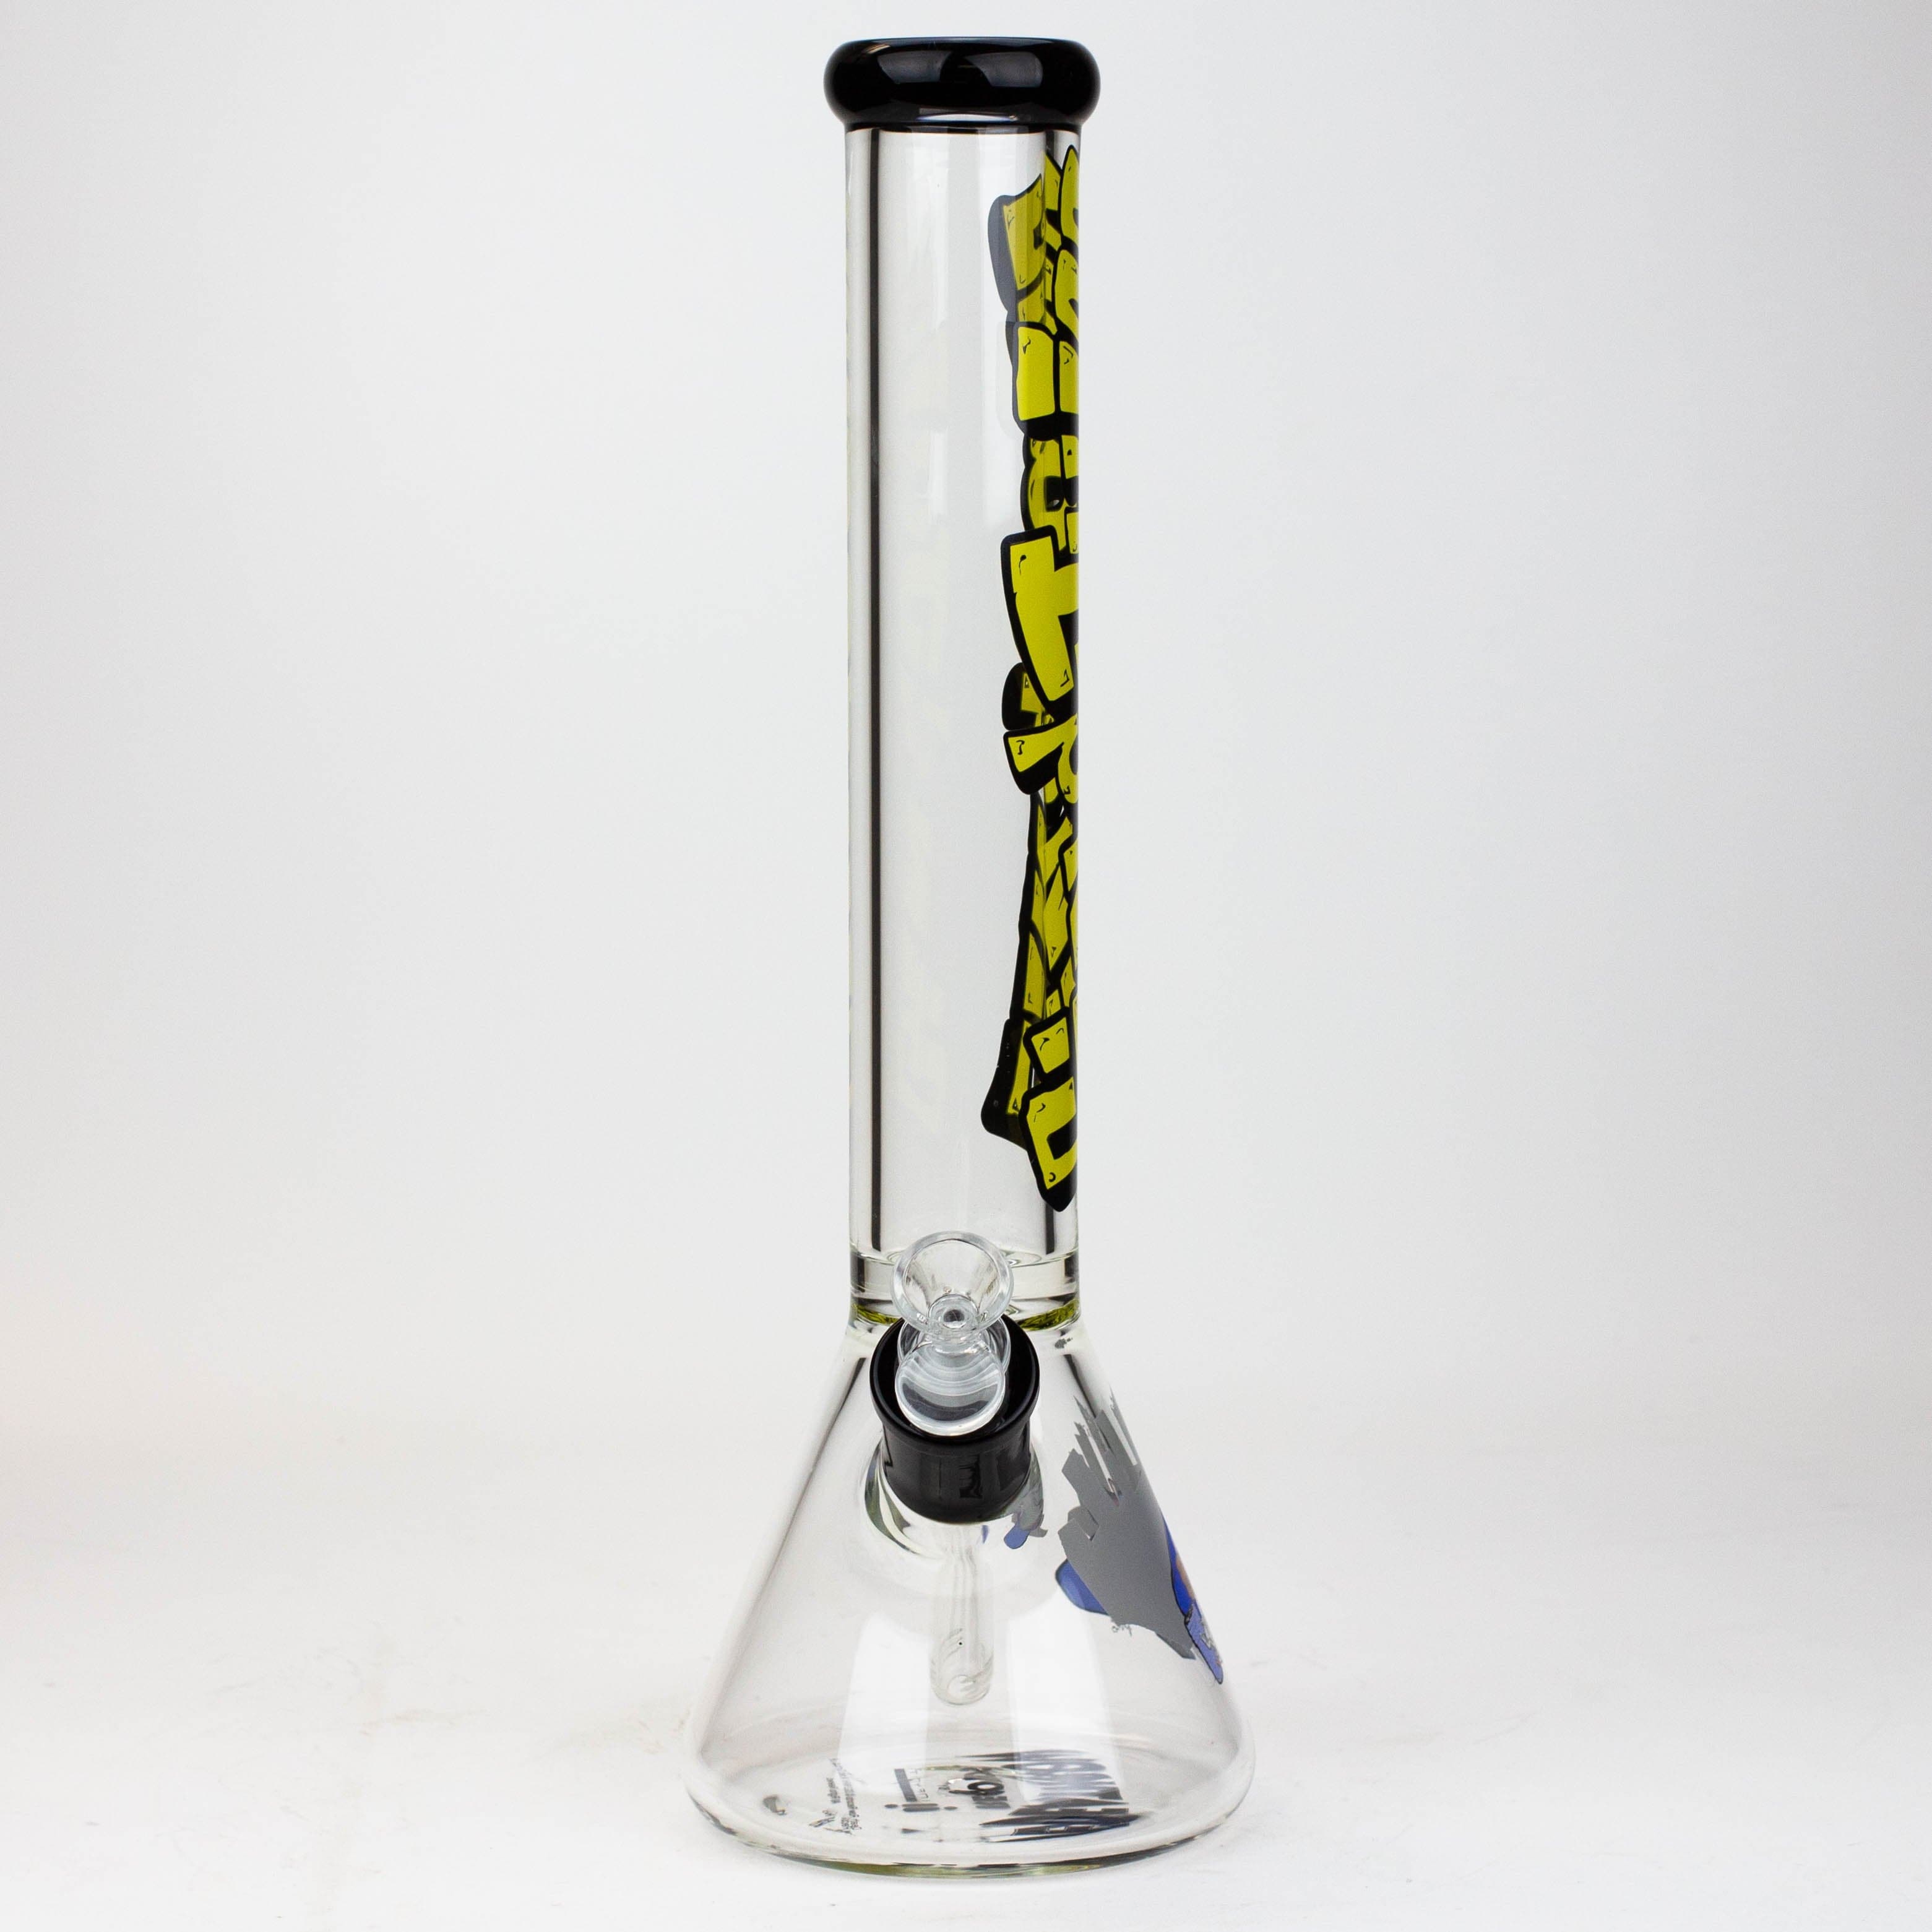 Death row 7 mm glass water pipes by infyniti 15.5"_4